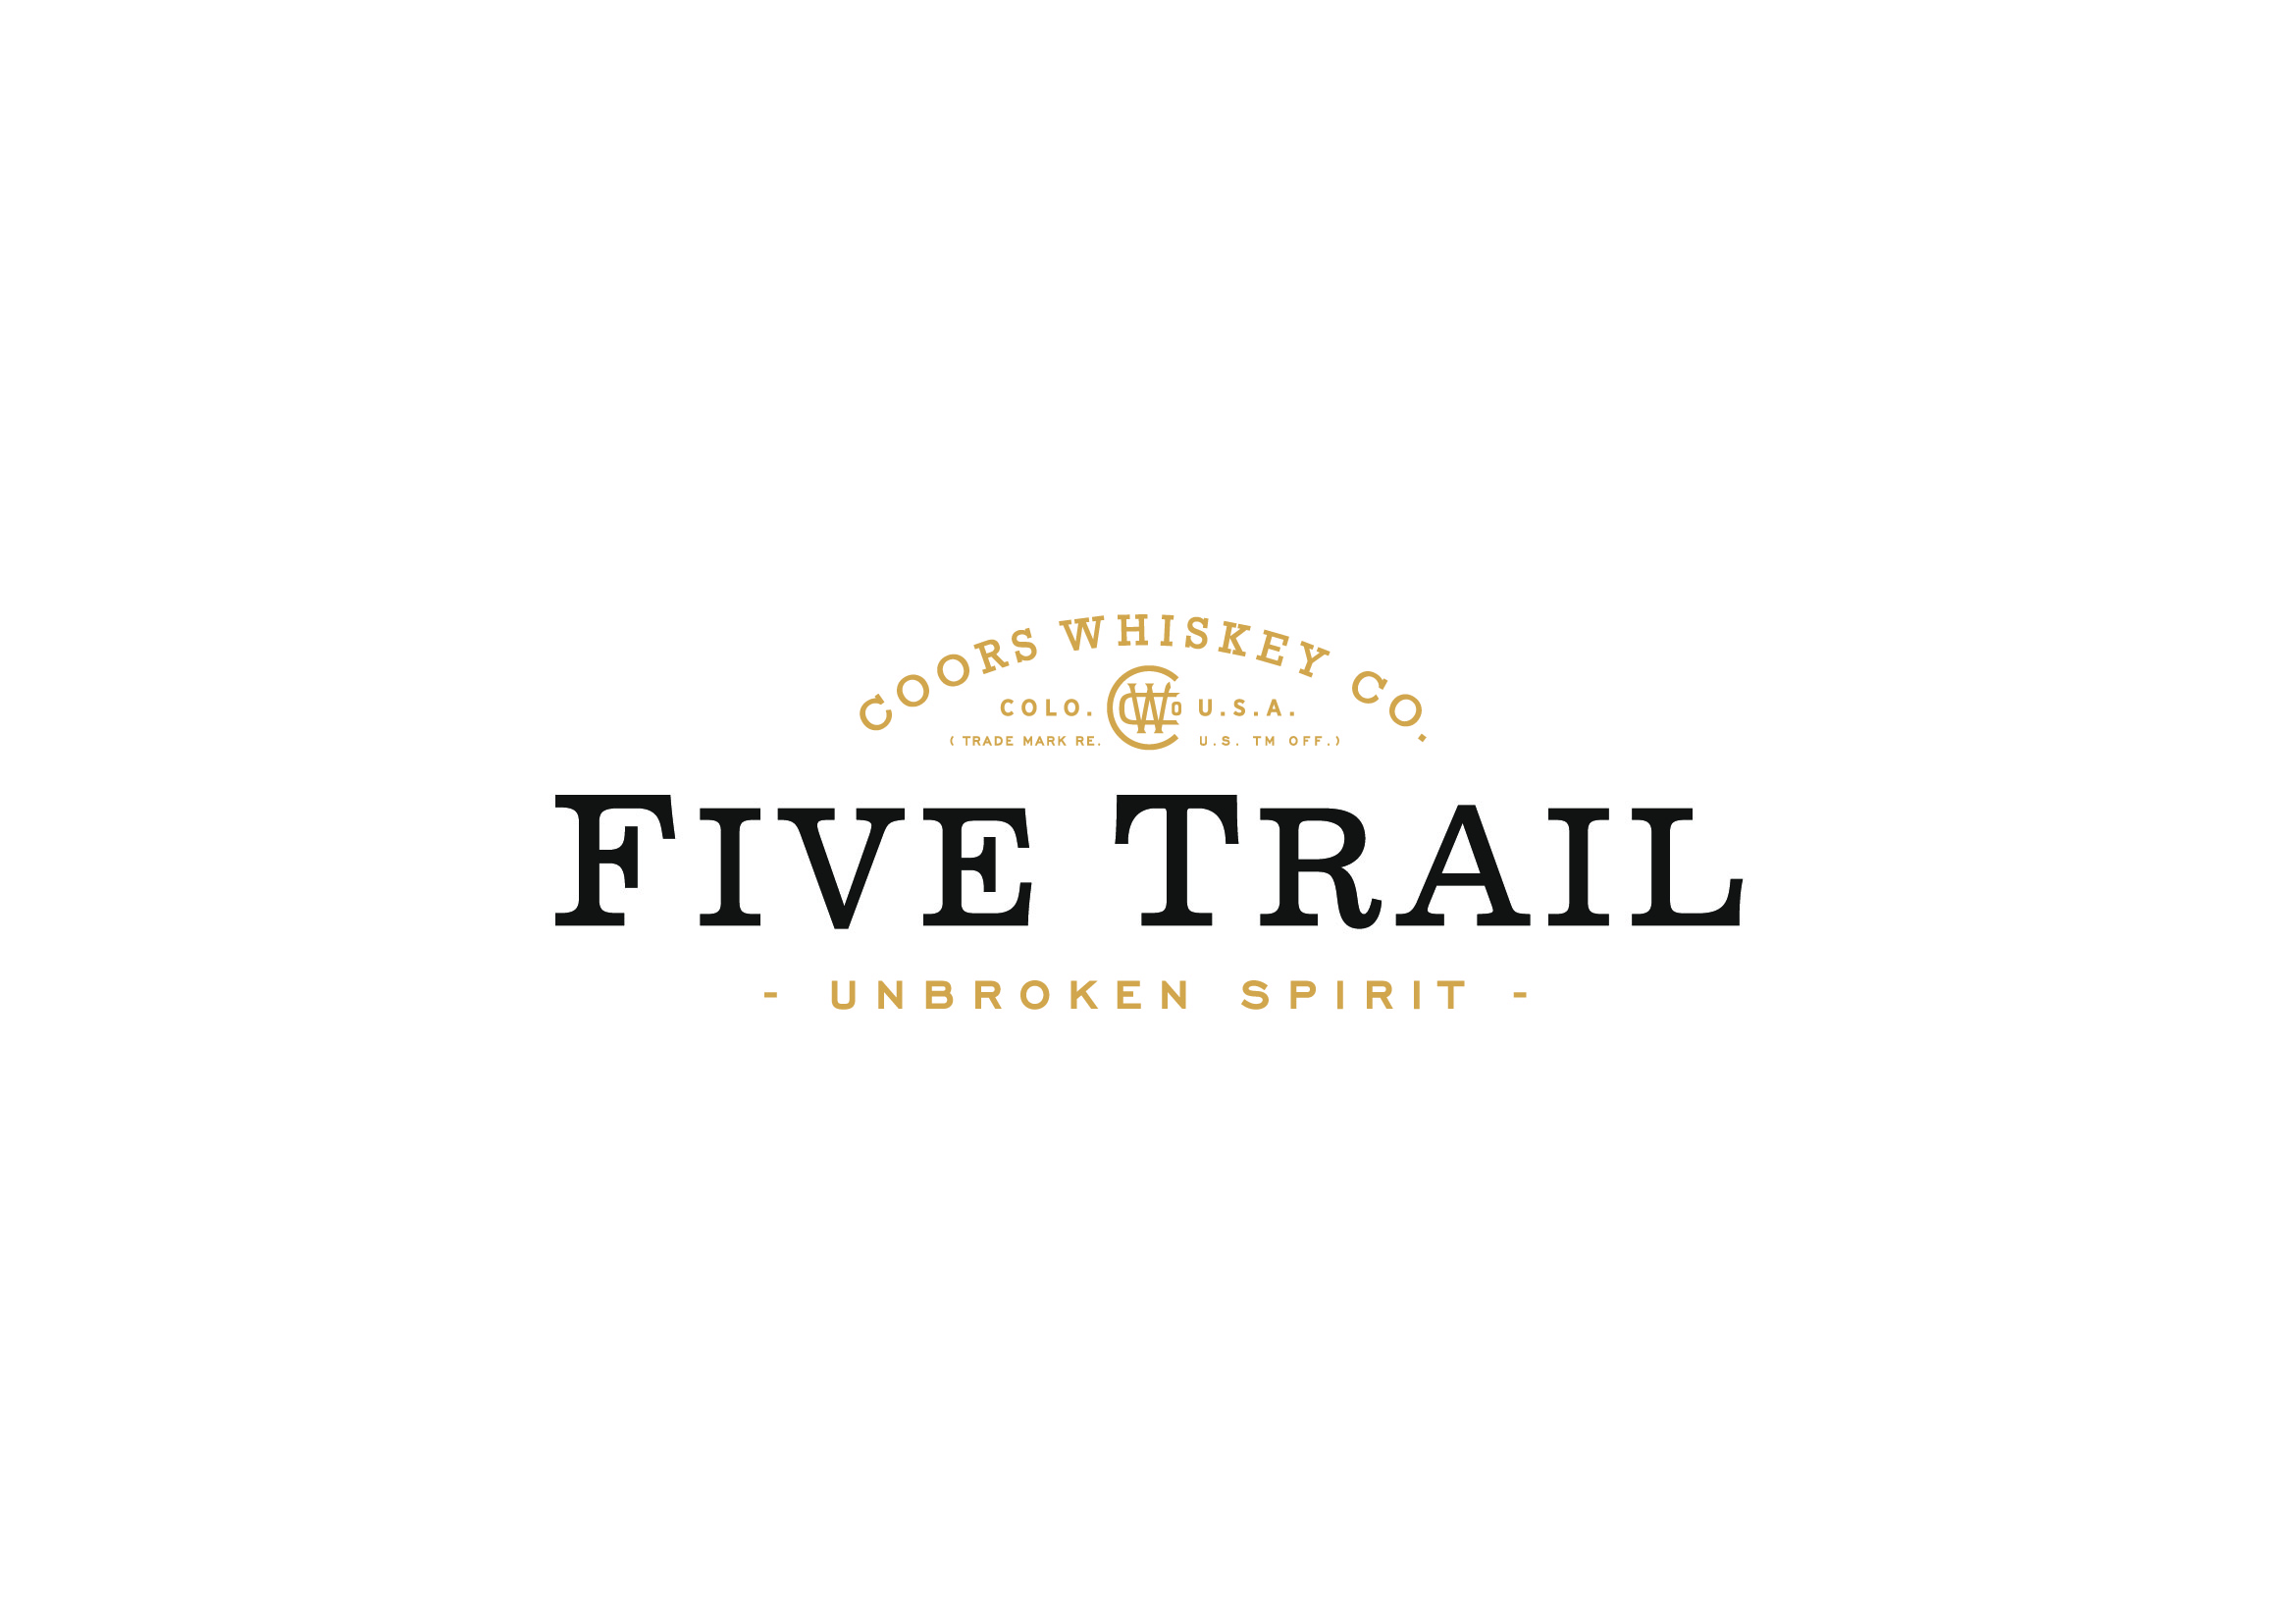 Coors Whiskey Co. Five Trail